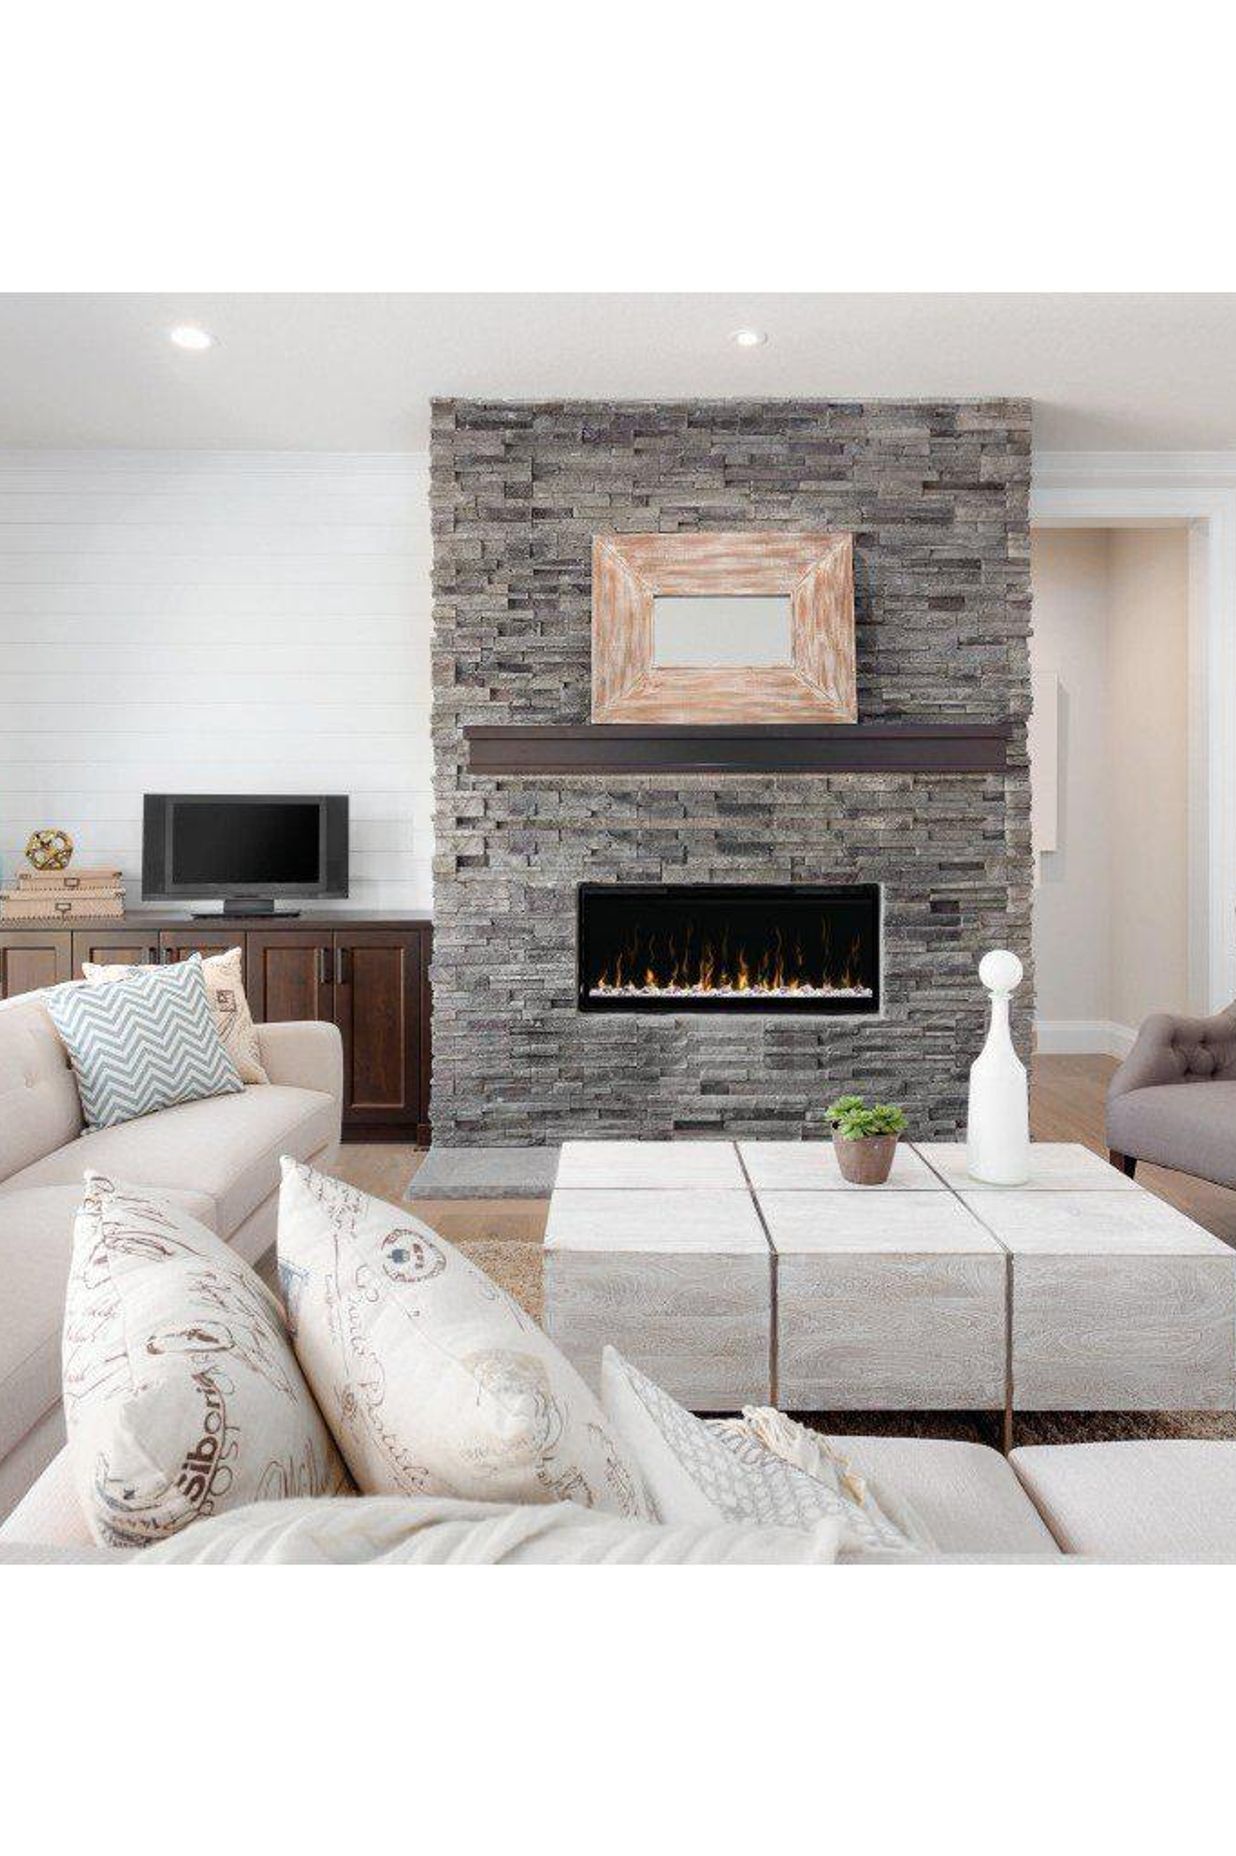 The Prism Electric Fireplace suits the neutral, sandy tones of this living space.